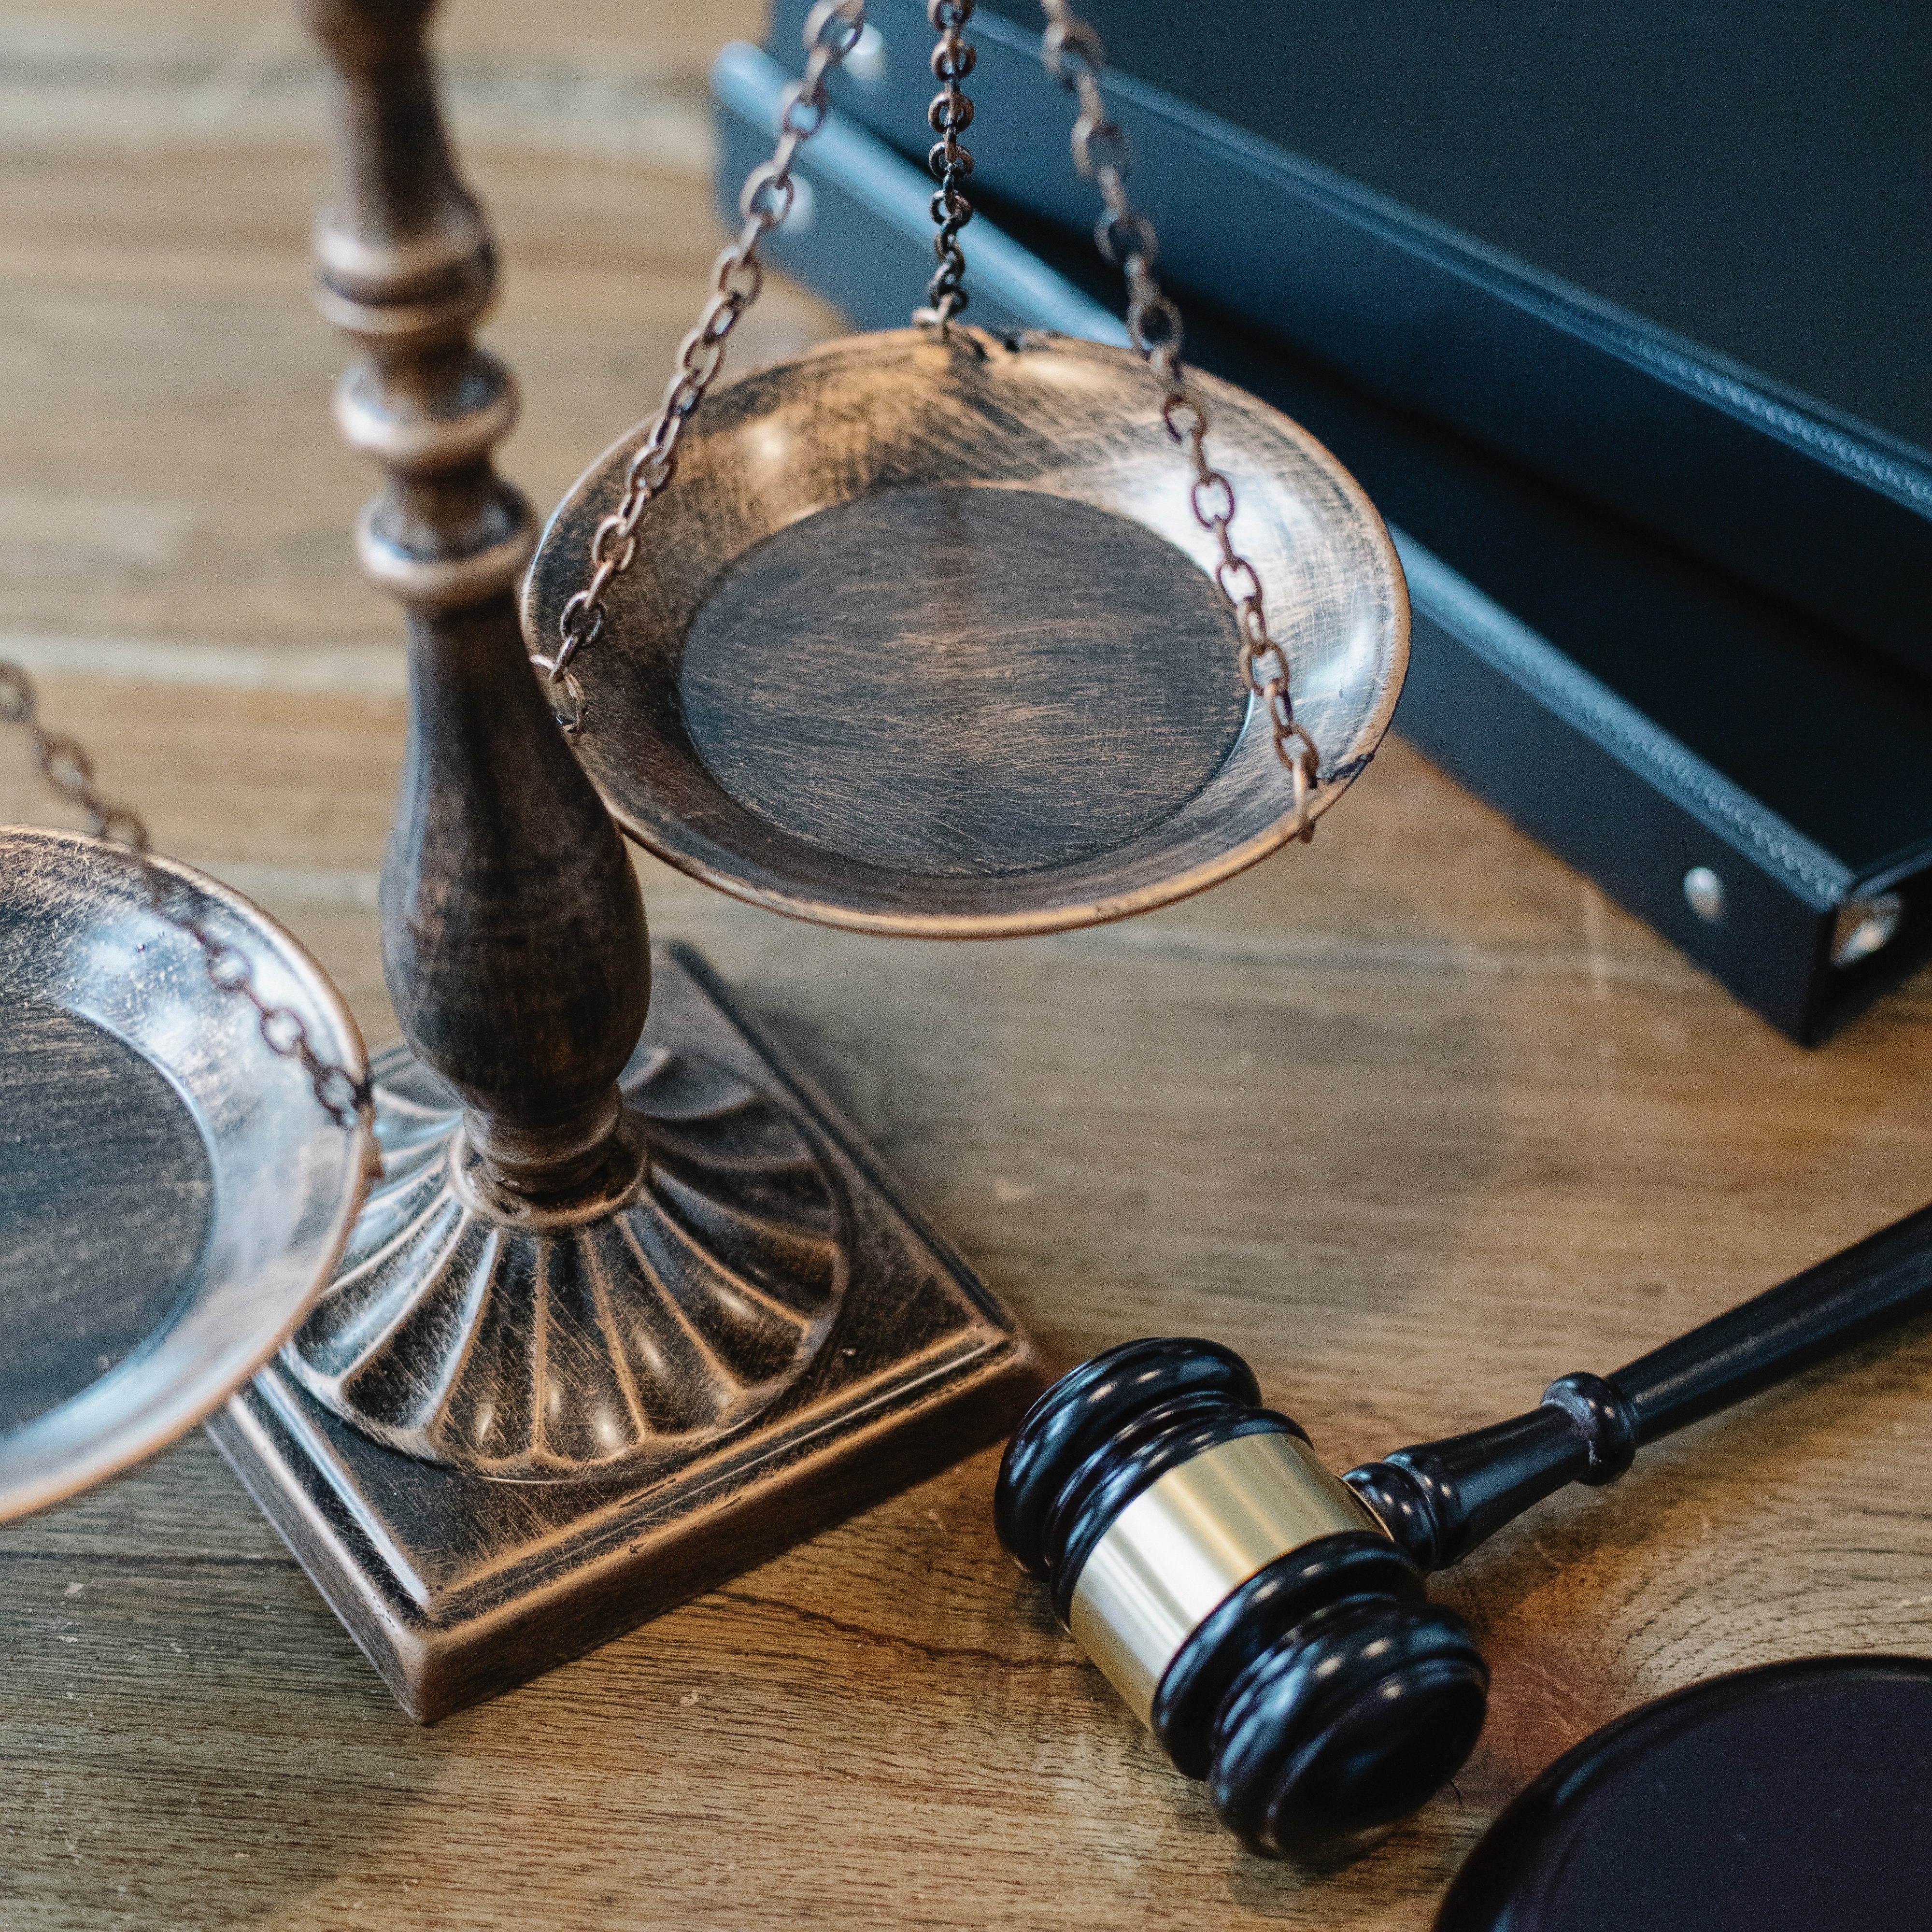 https://www.pexels.com/photo/justice-scales-and-gavel-on-wooden-surface-5668882/